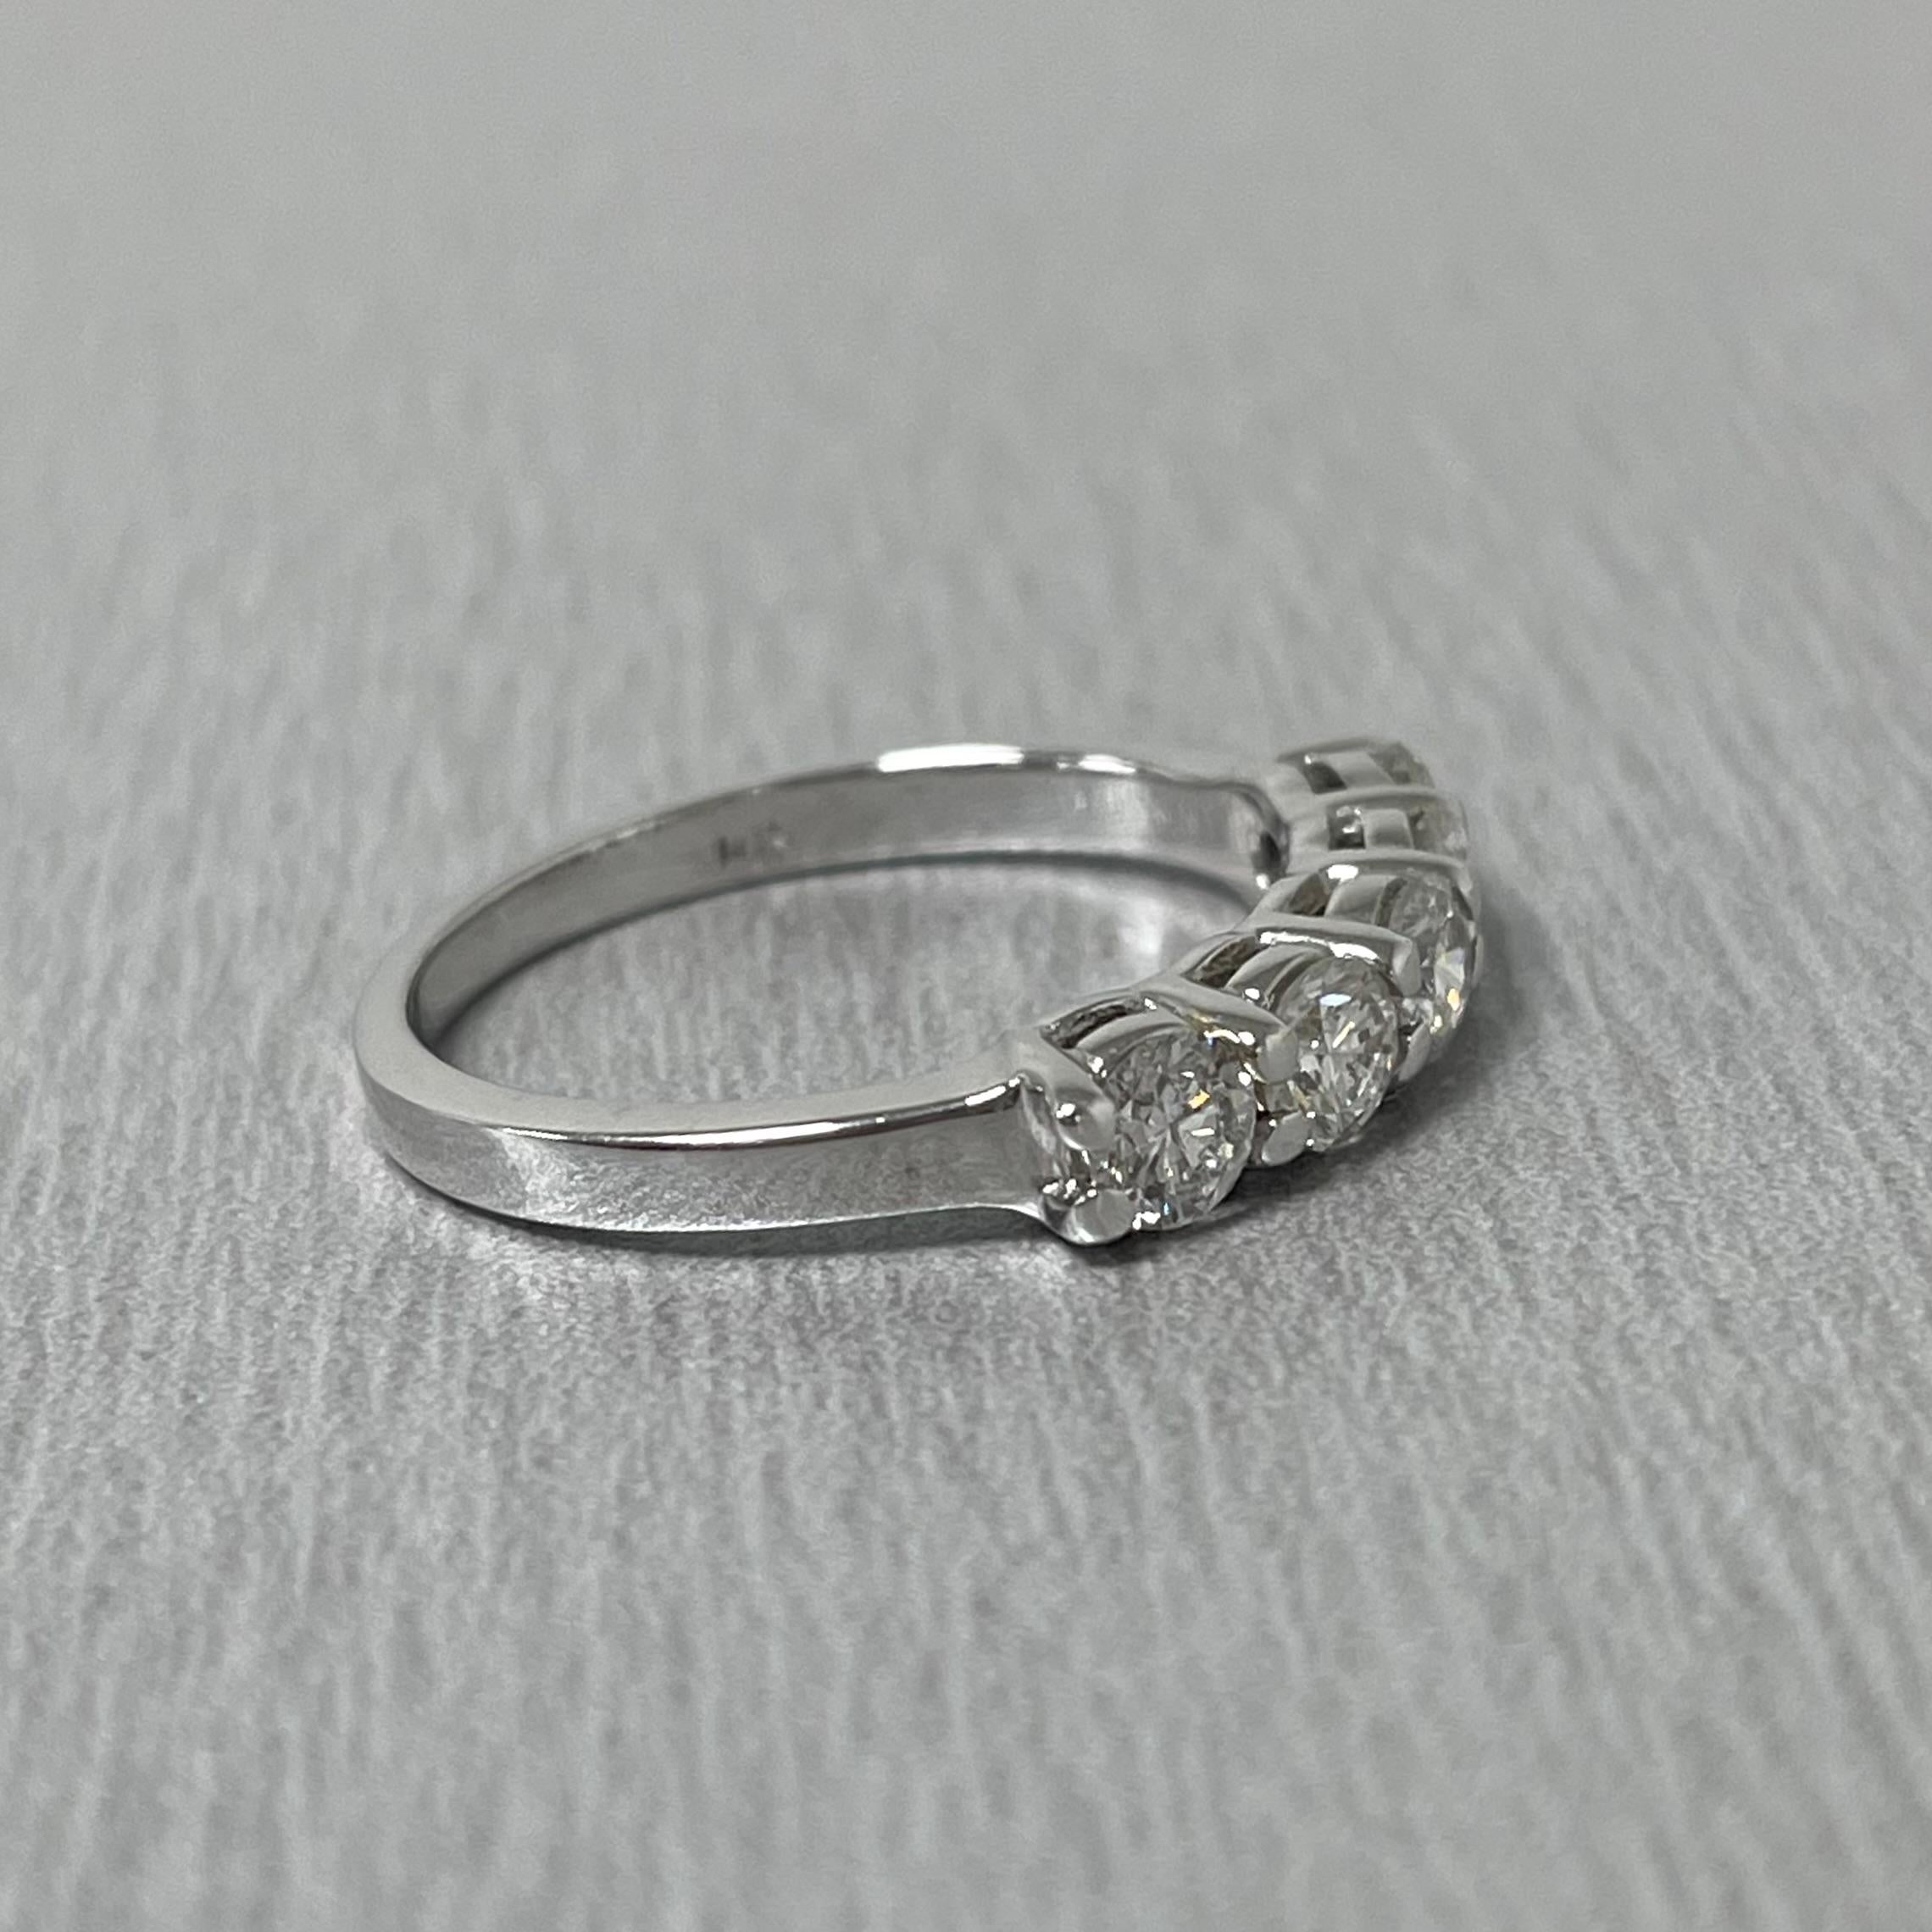 Women's or Men's Beauvince 5 Stone Diamond Ring '0.85 Ct Diamonds' in White Gold For Sale